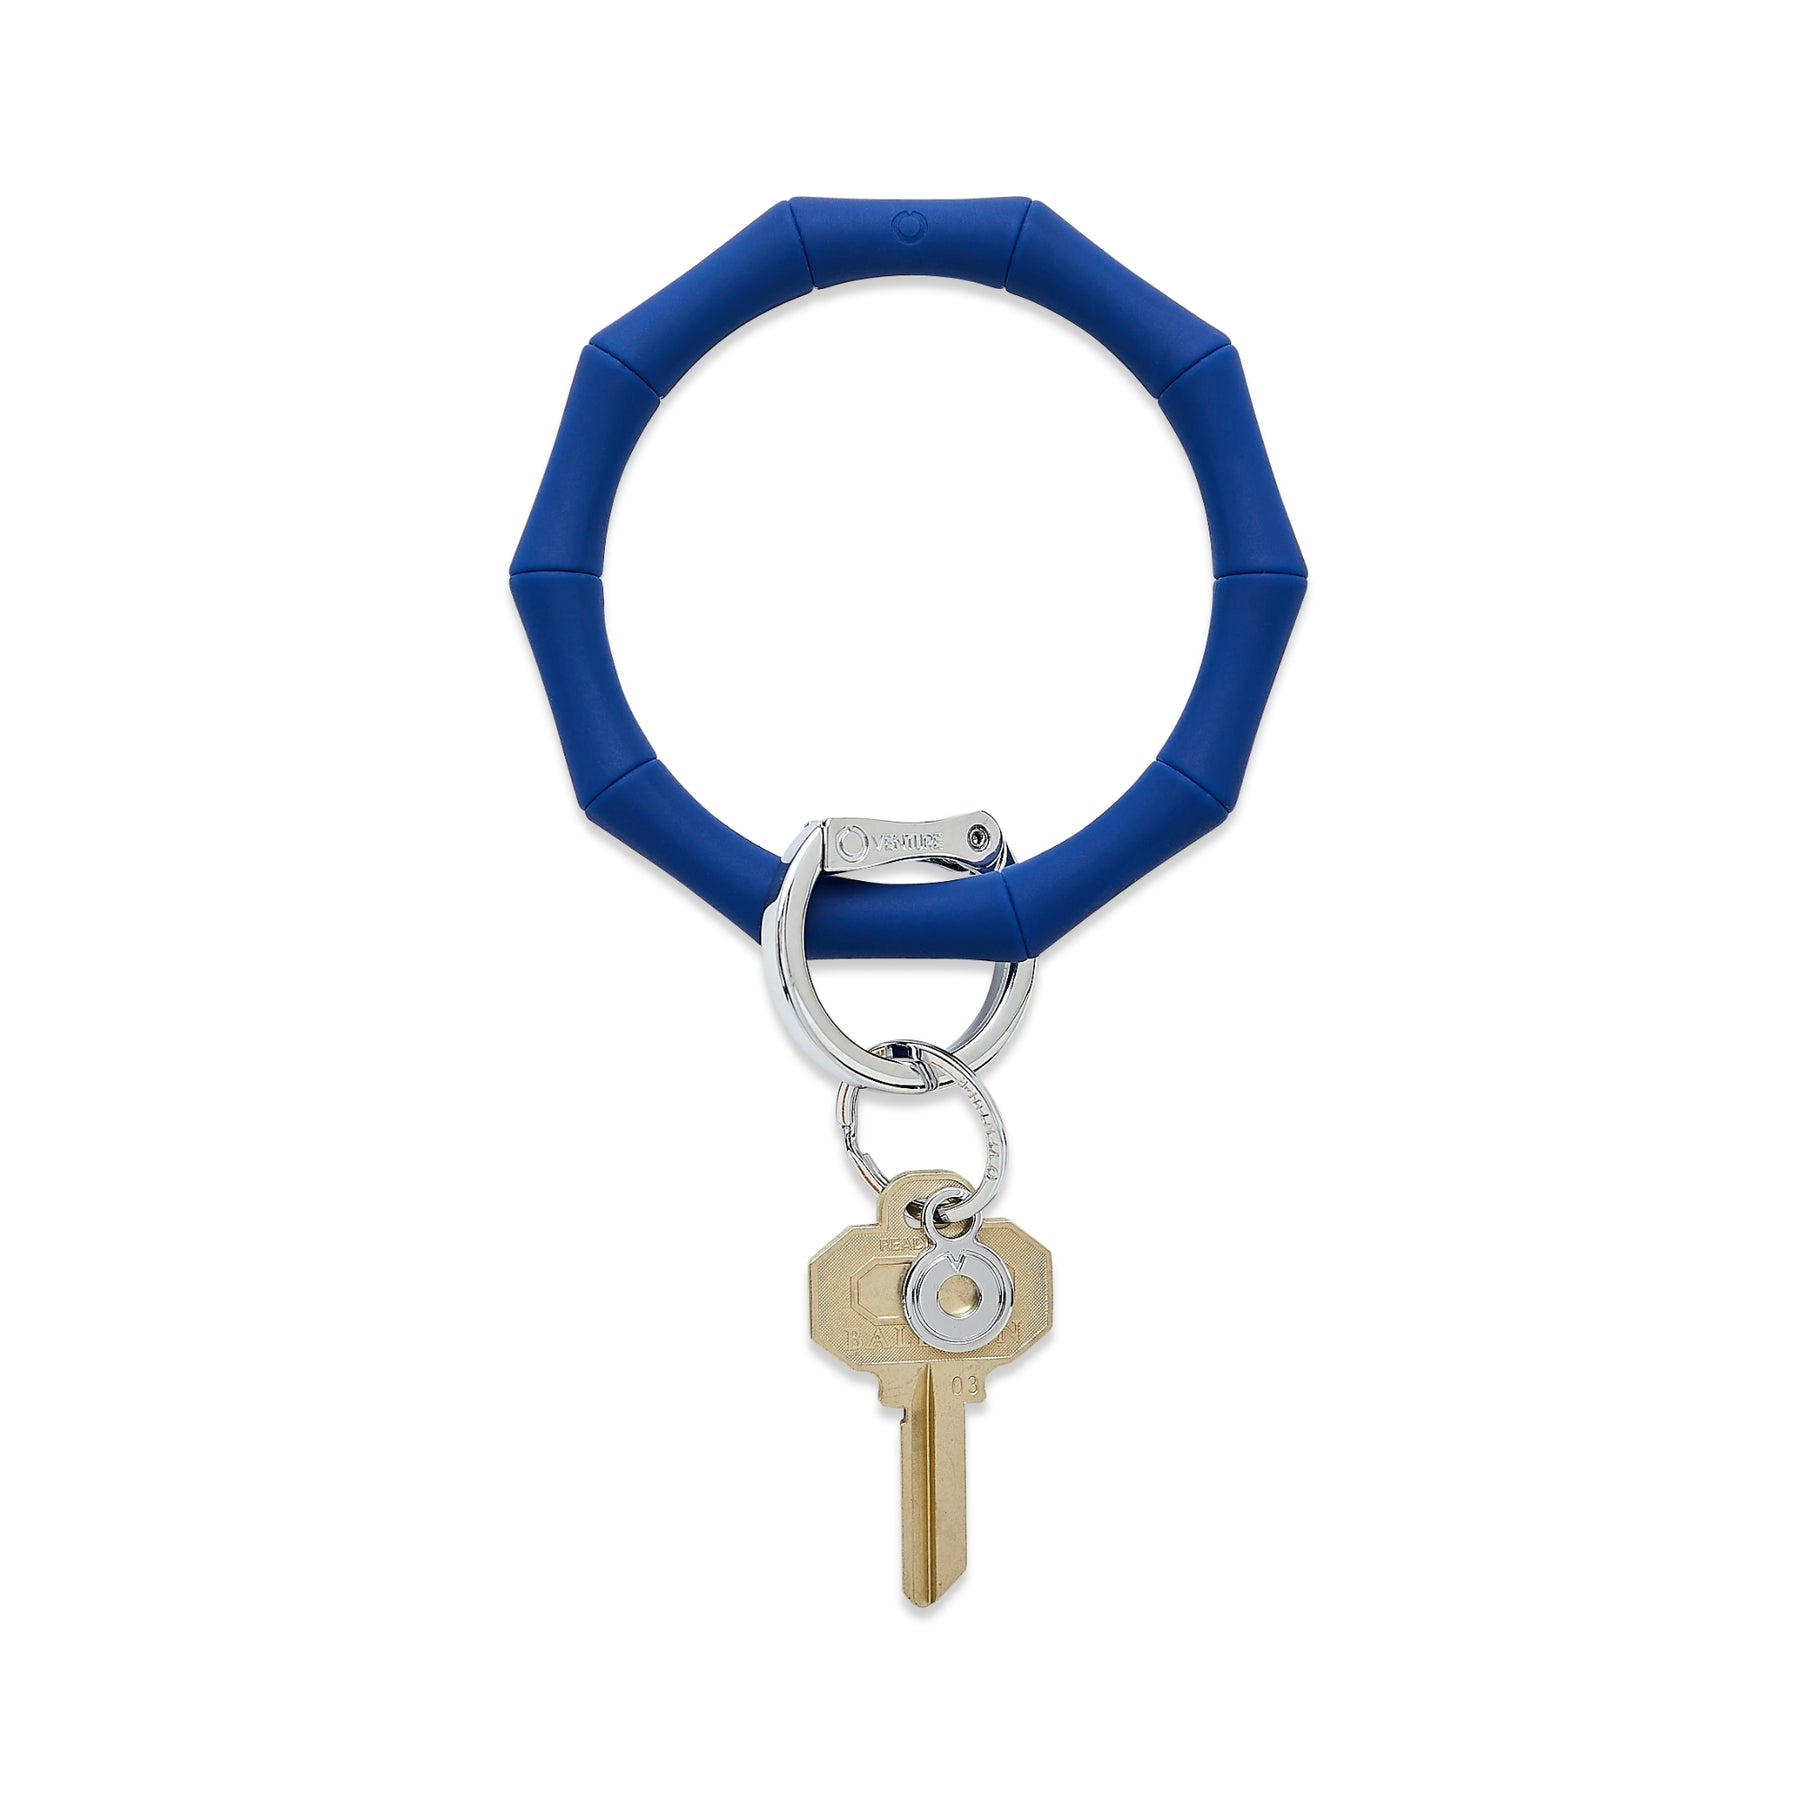 Oventure Big O Silicone Key Ring- Bamboo (12 Colors) – Adelaide's